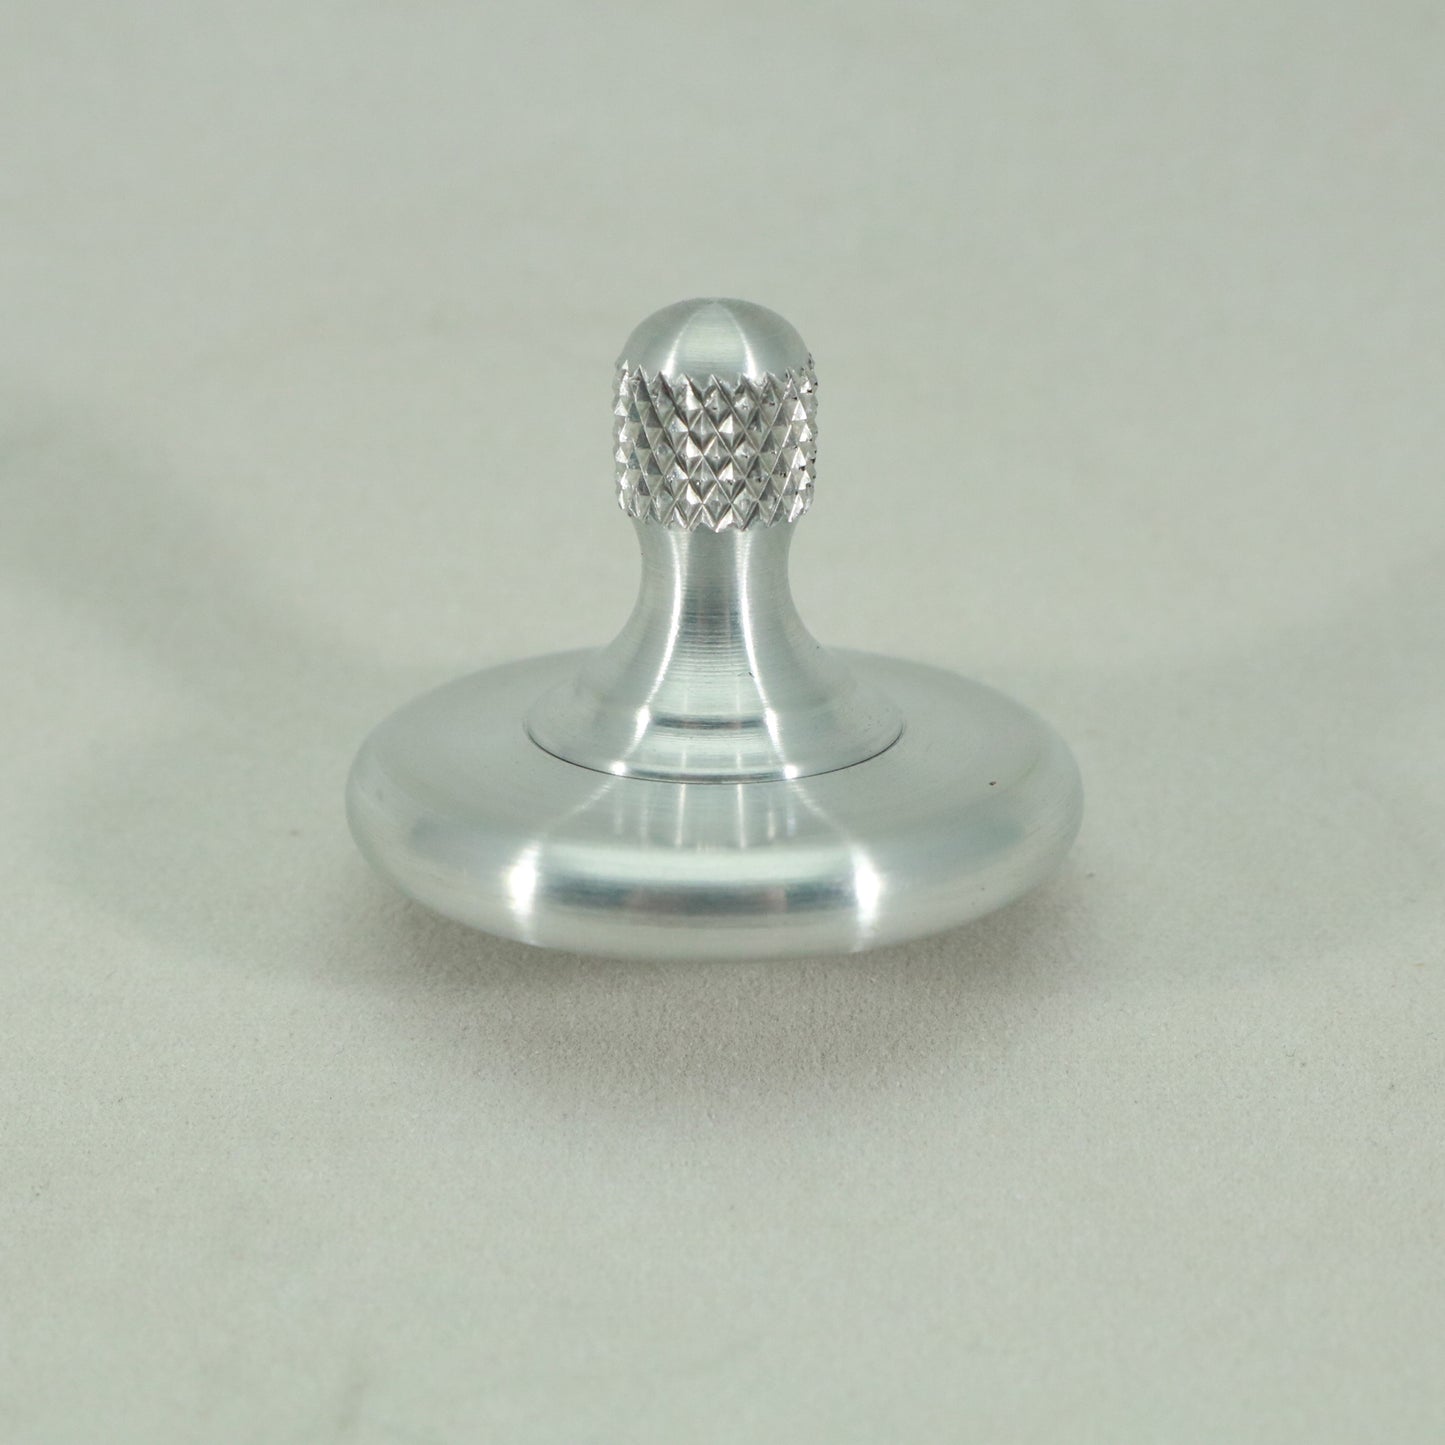 Simple and elegant the M3 spinning top by Kemner Design in brushed aluminum